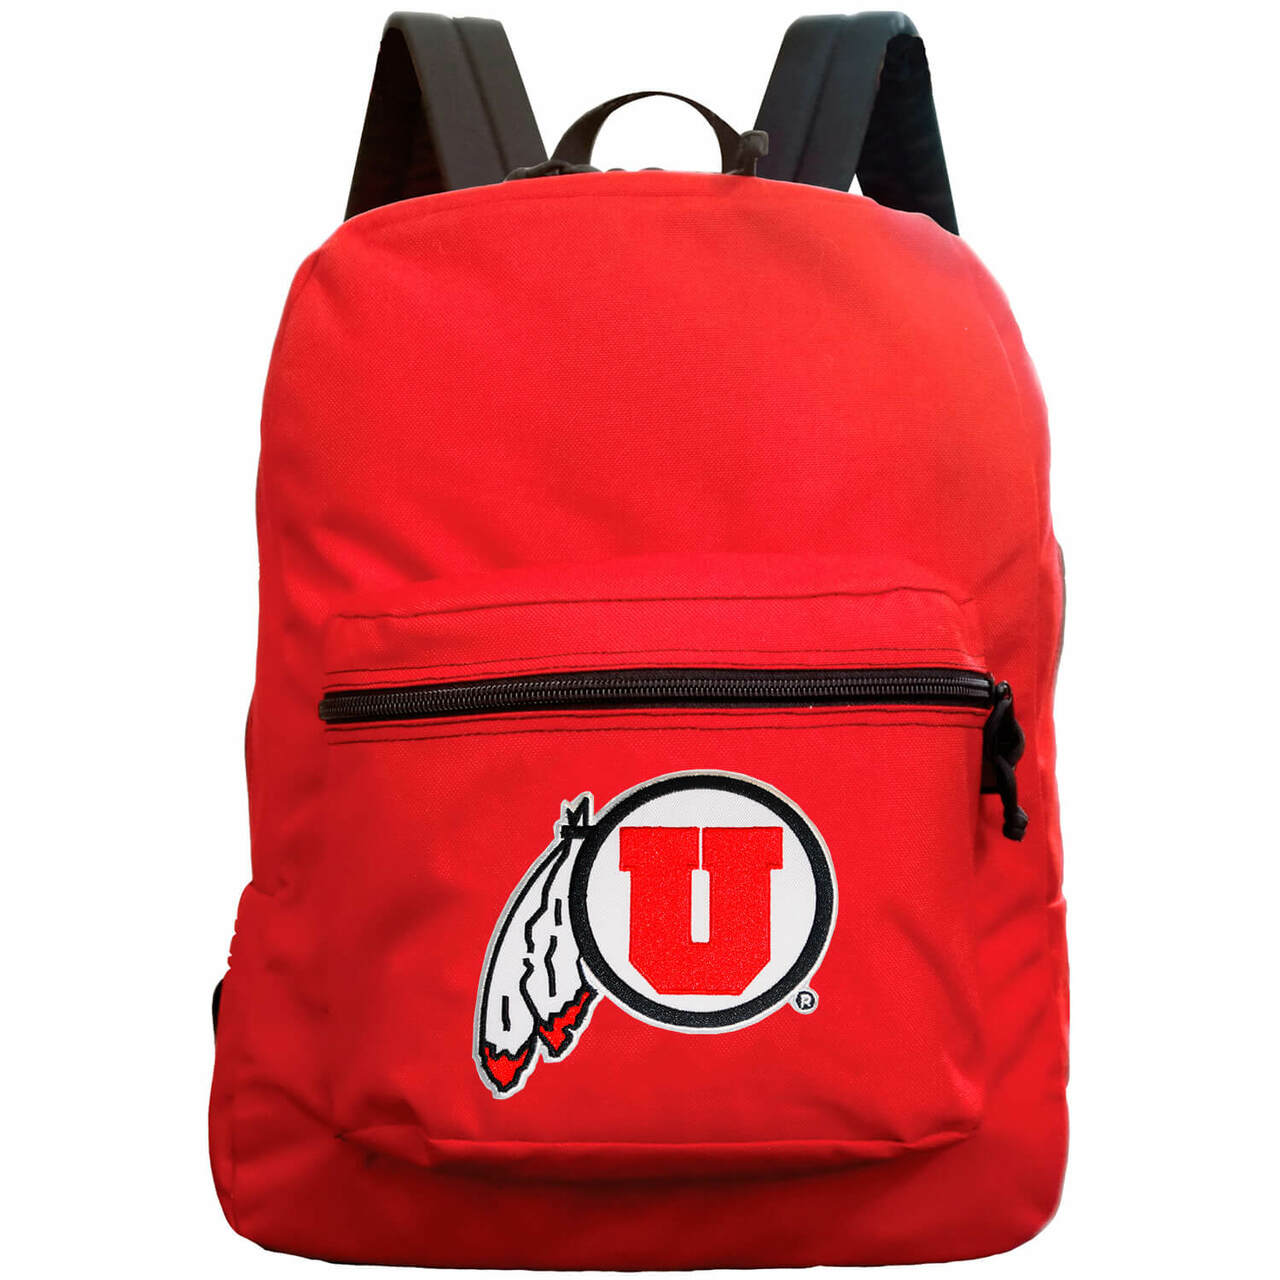 Utah Utes Made in the USA premium Backpack in Red